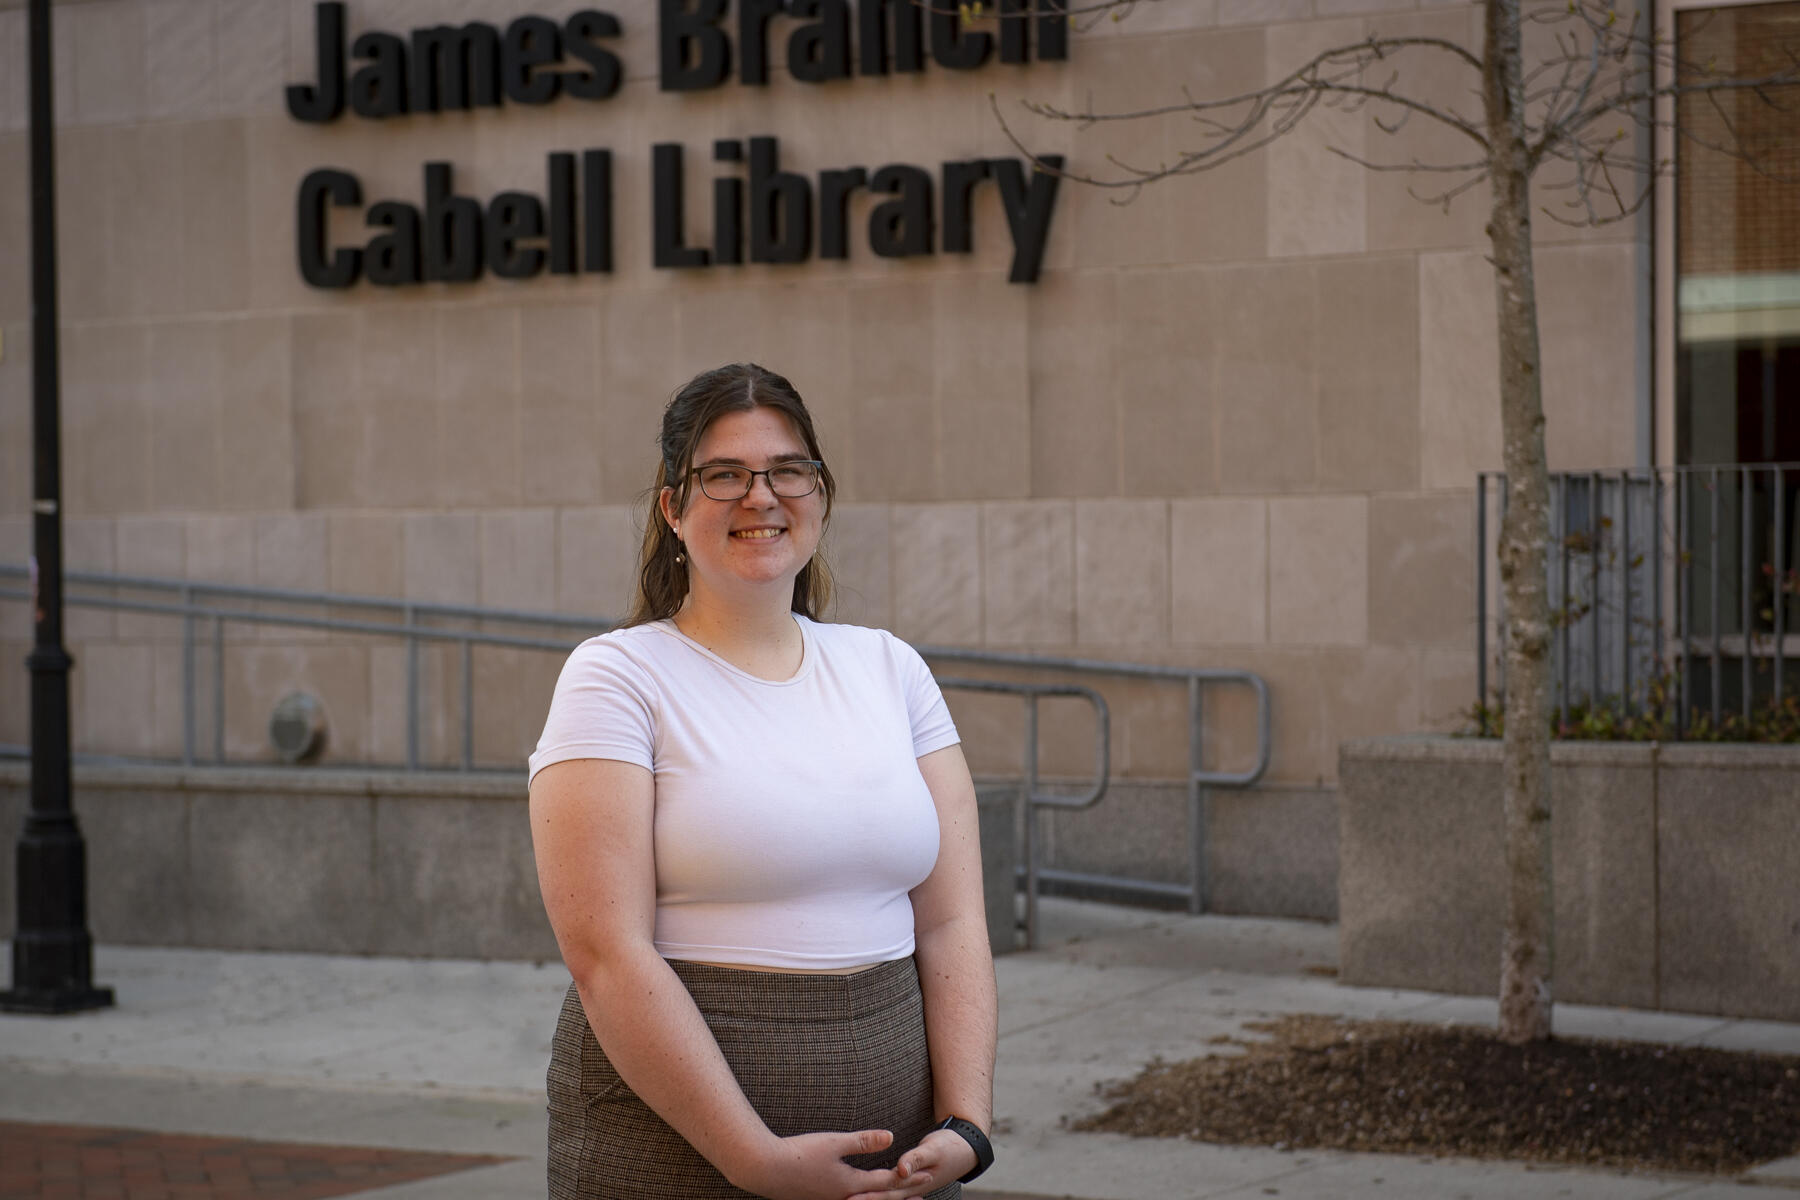 A portrait of a woman standing in front of the James Branch Cabell Library